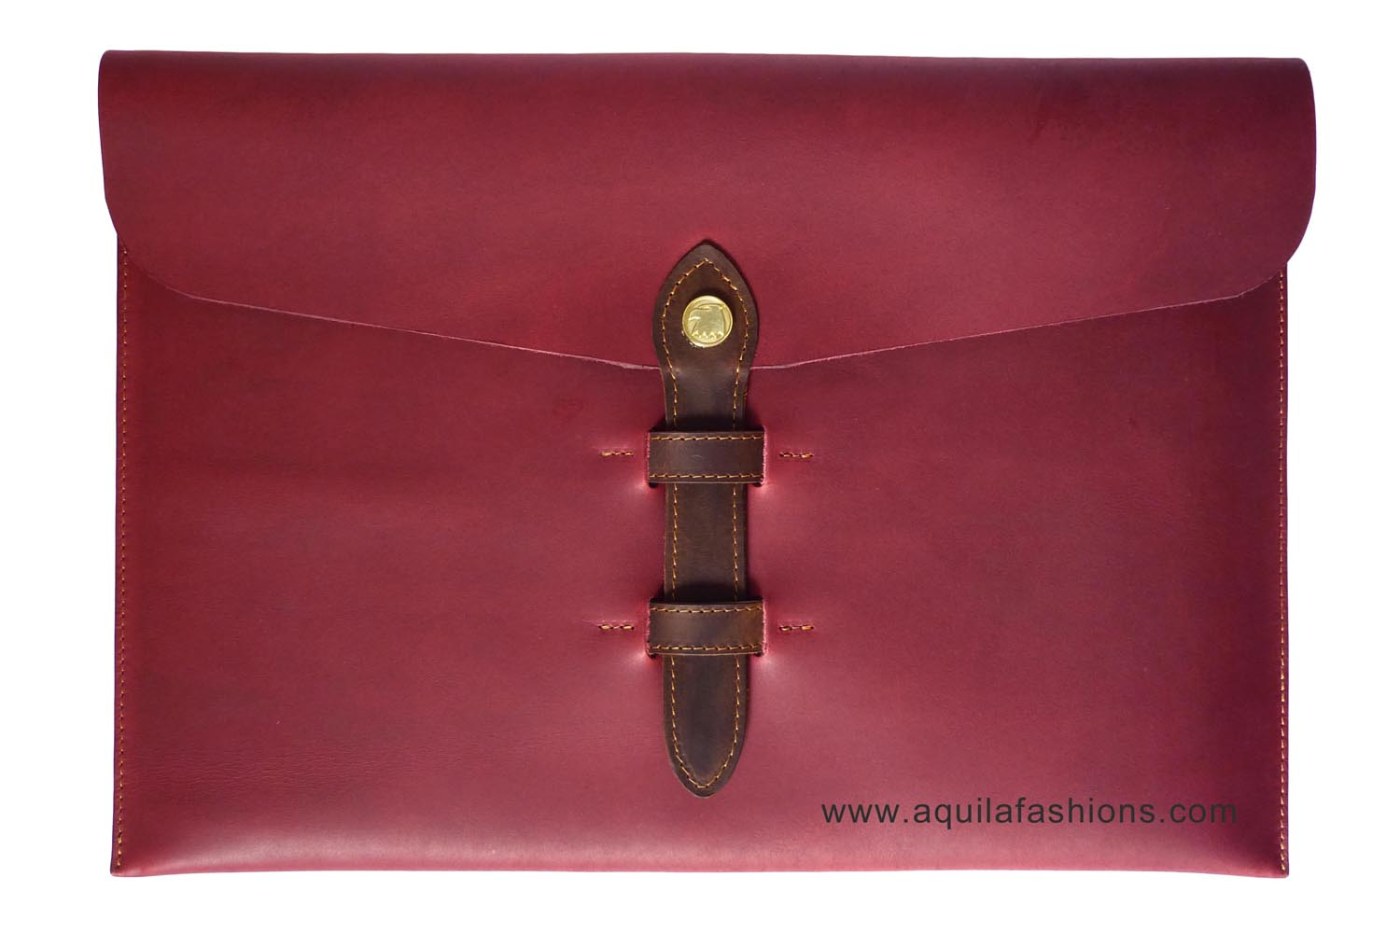 leather laptop sleeves